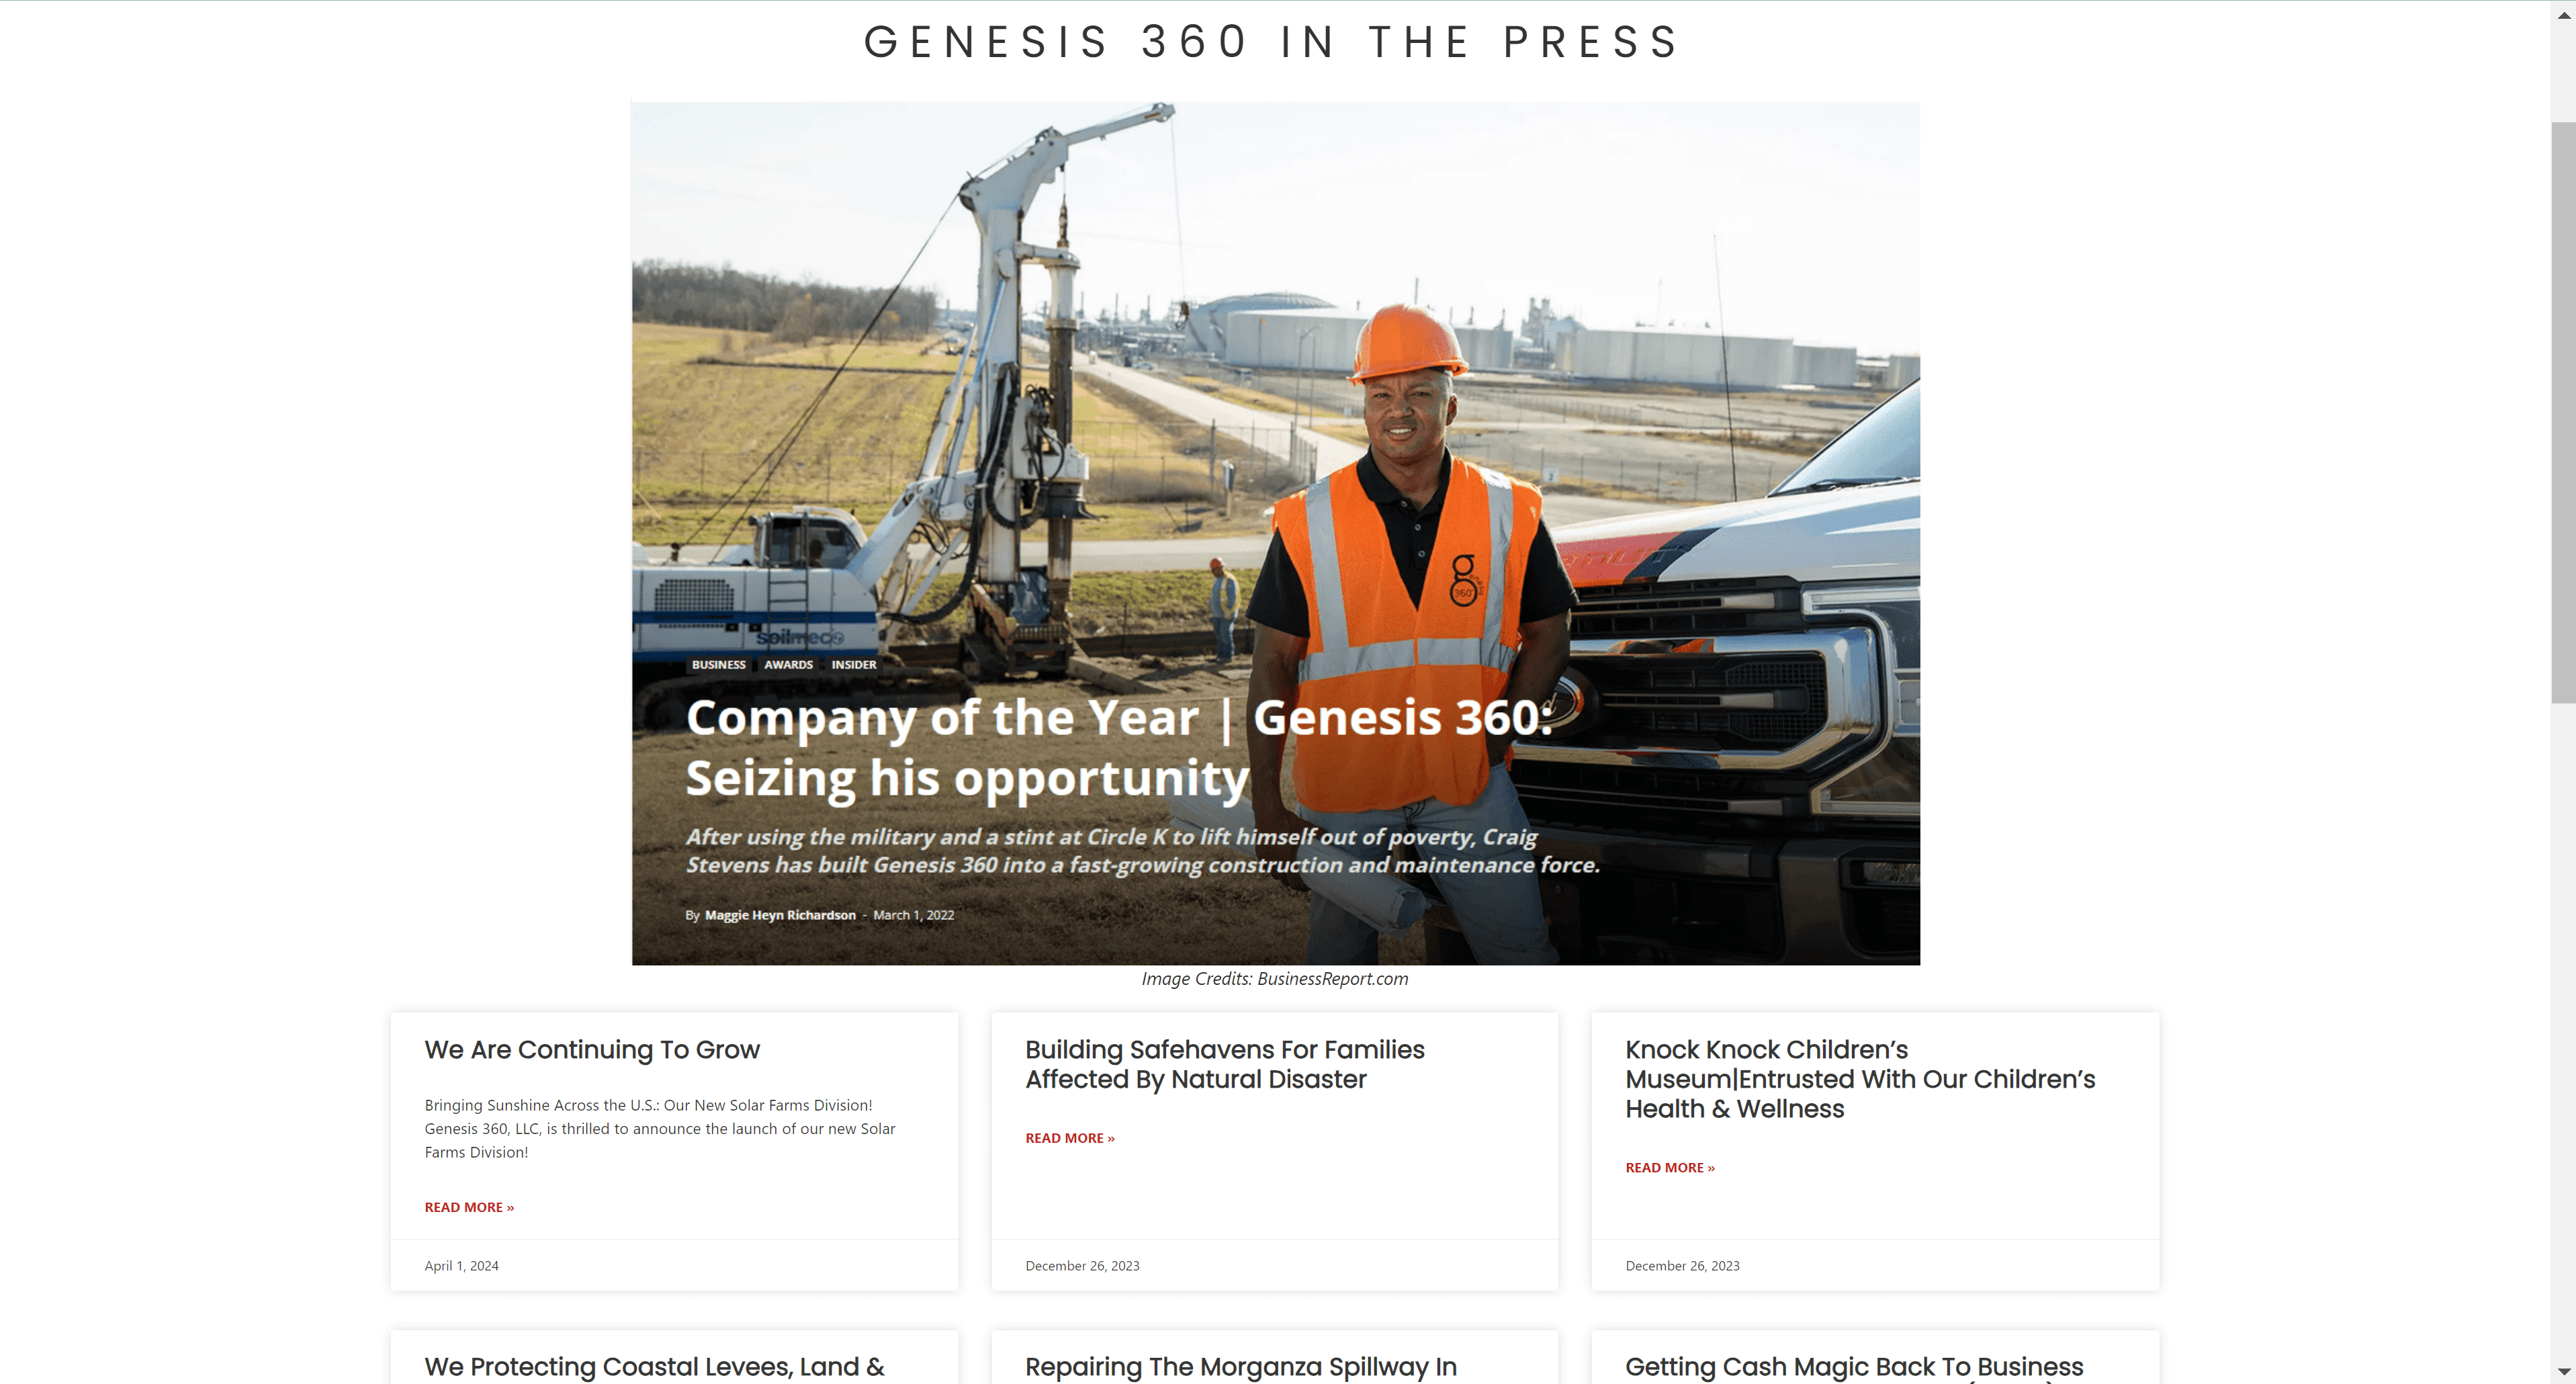 This blog pages is a repository of Genesis 360 media mentions, press, and educational content to engage the construction industry audience.